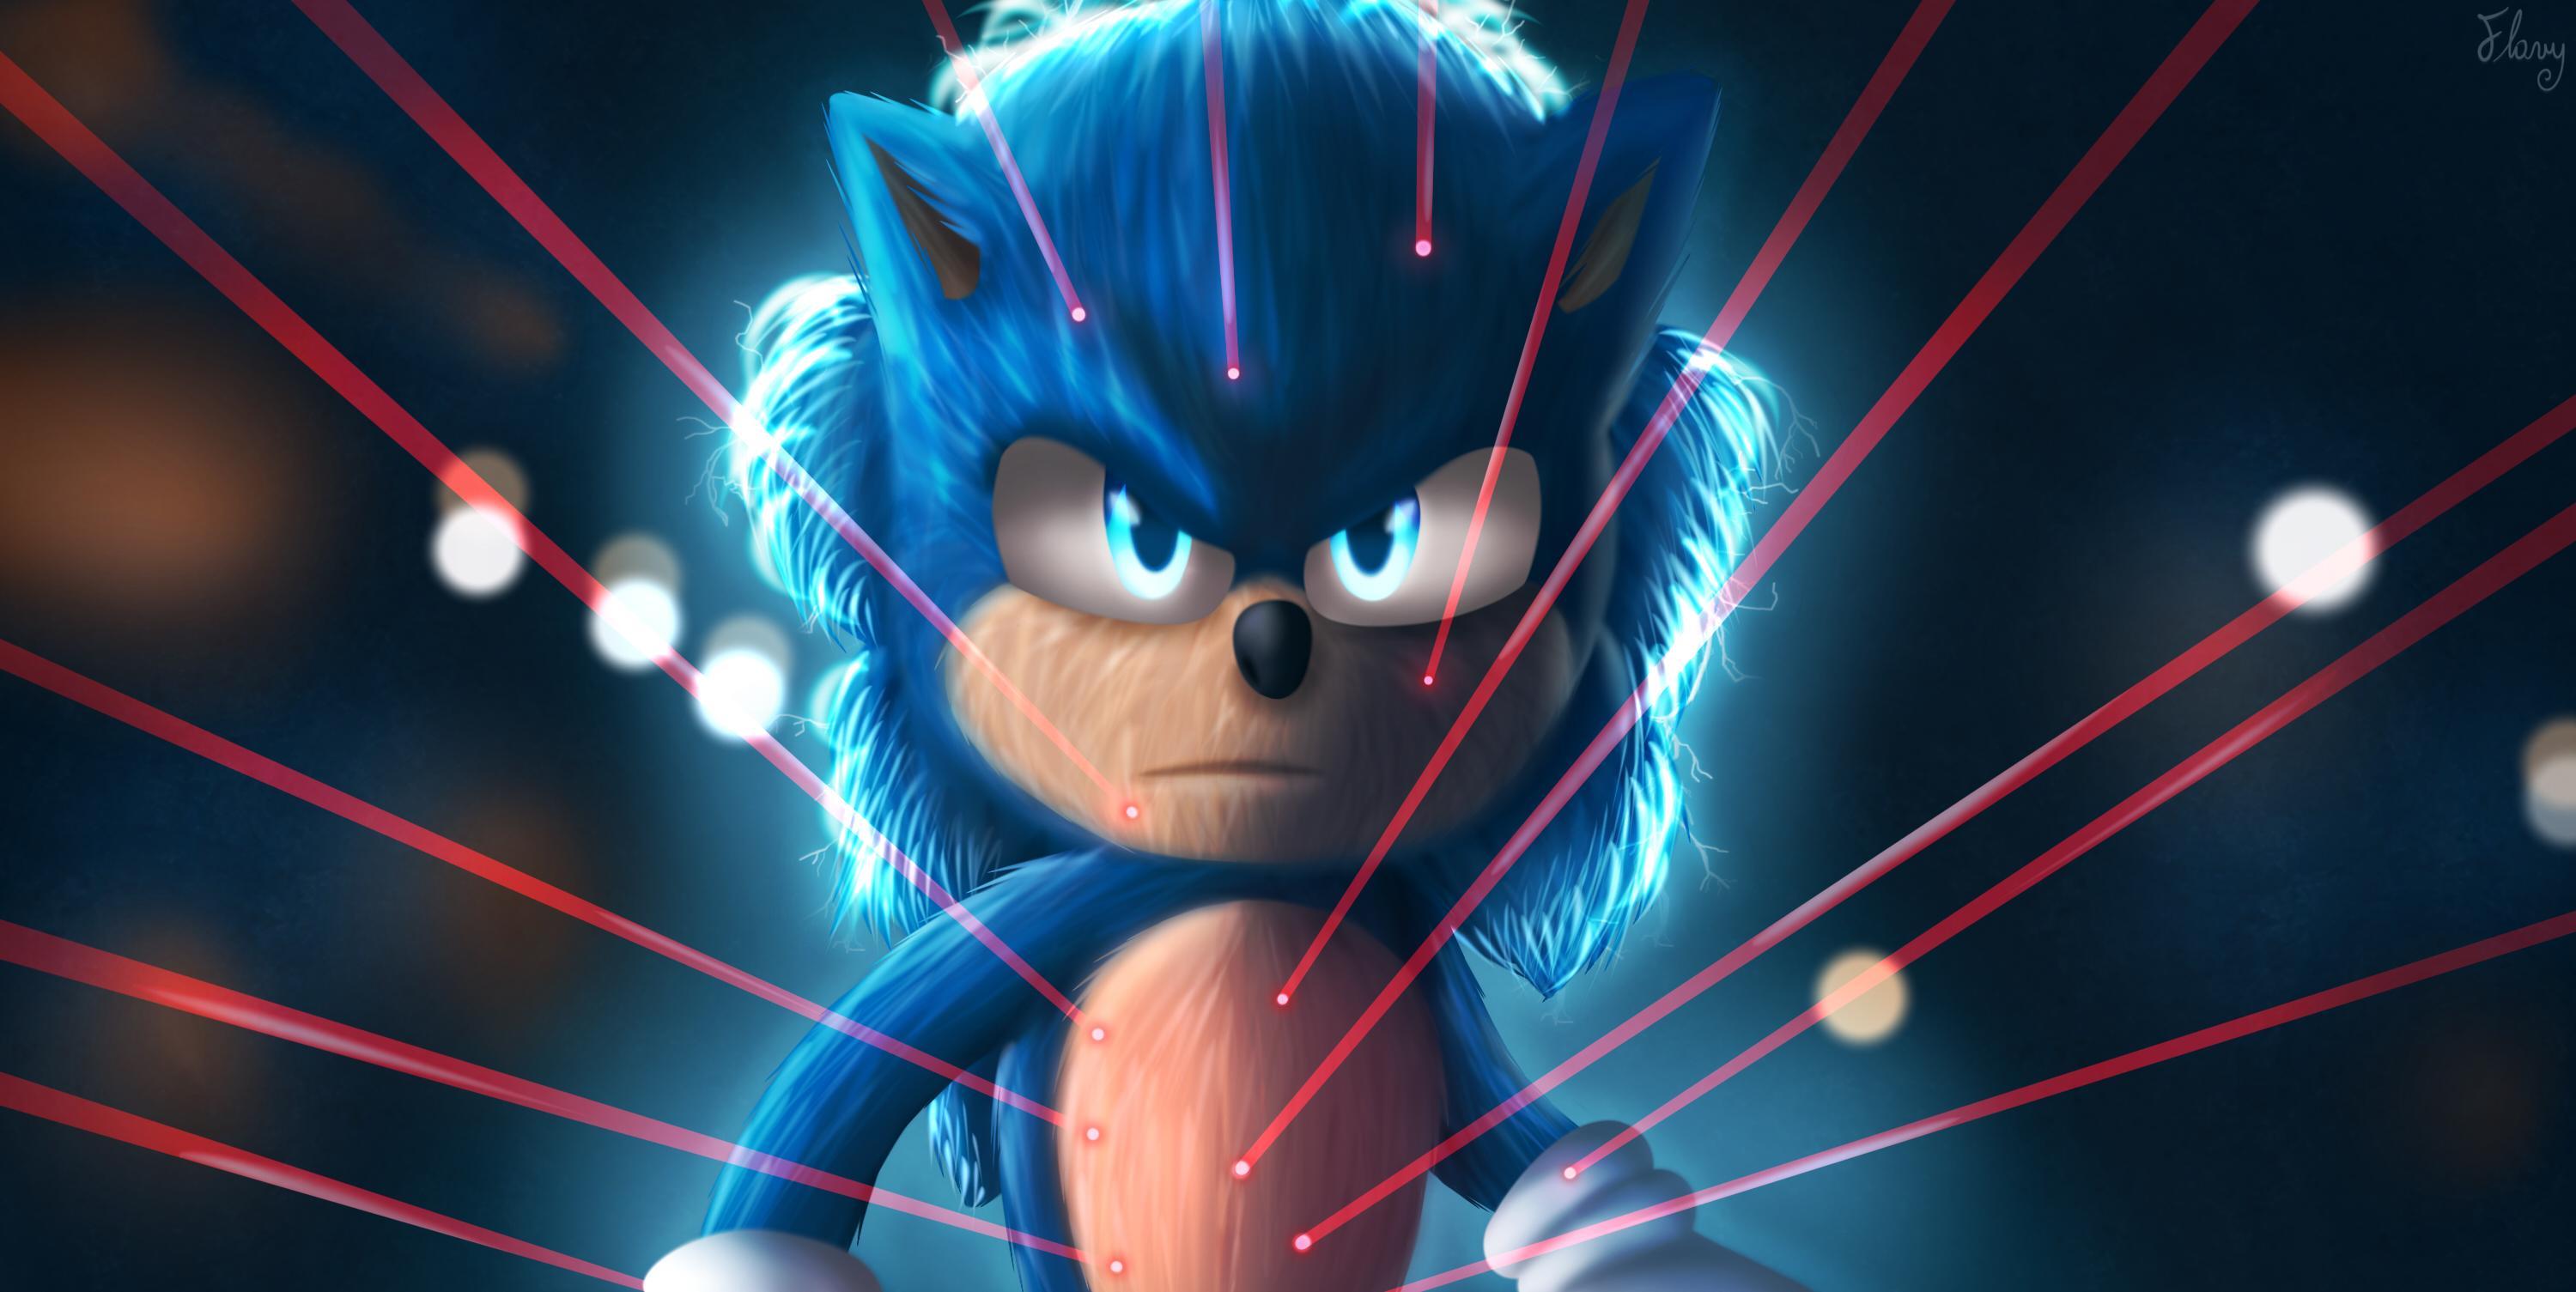 Sonic the Hedgehog (2020) HD Wallpaper. Background Image